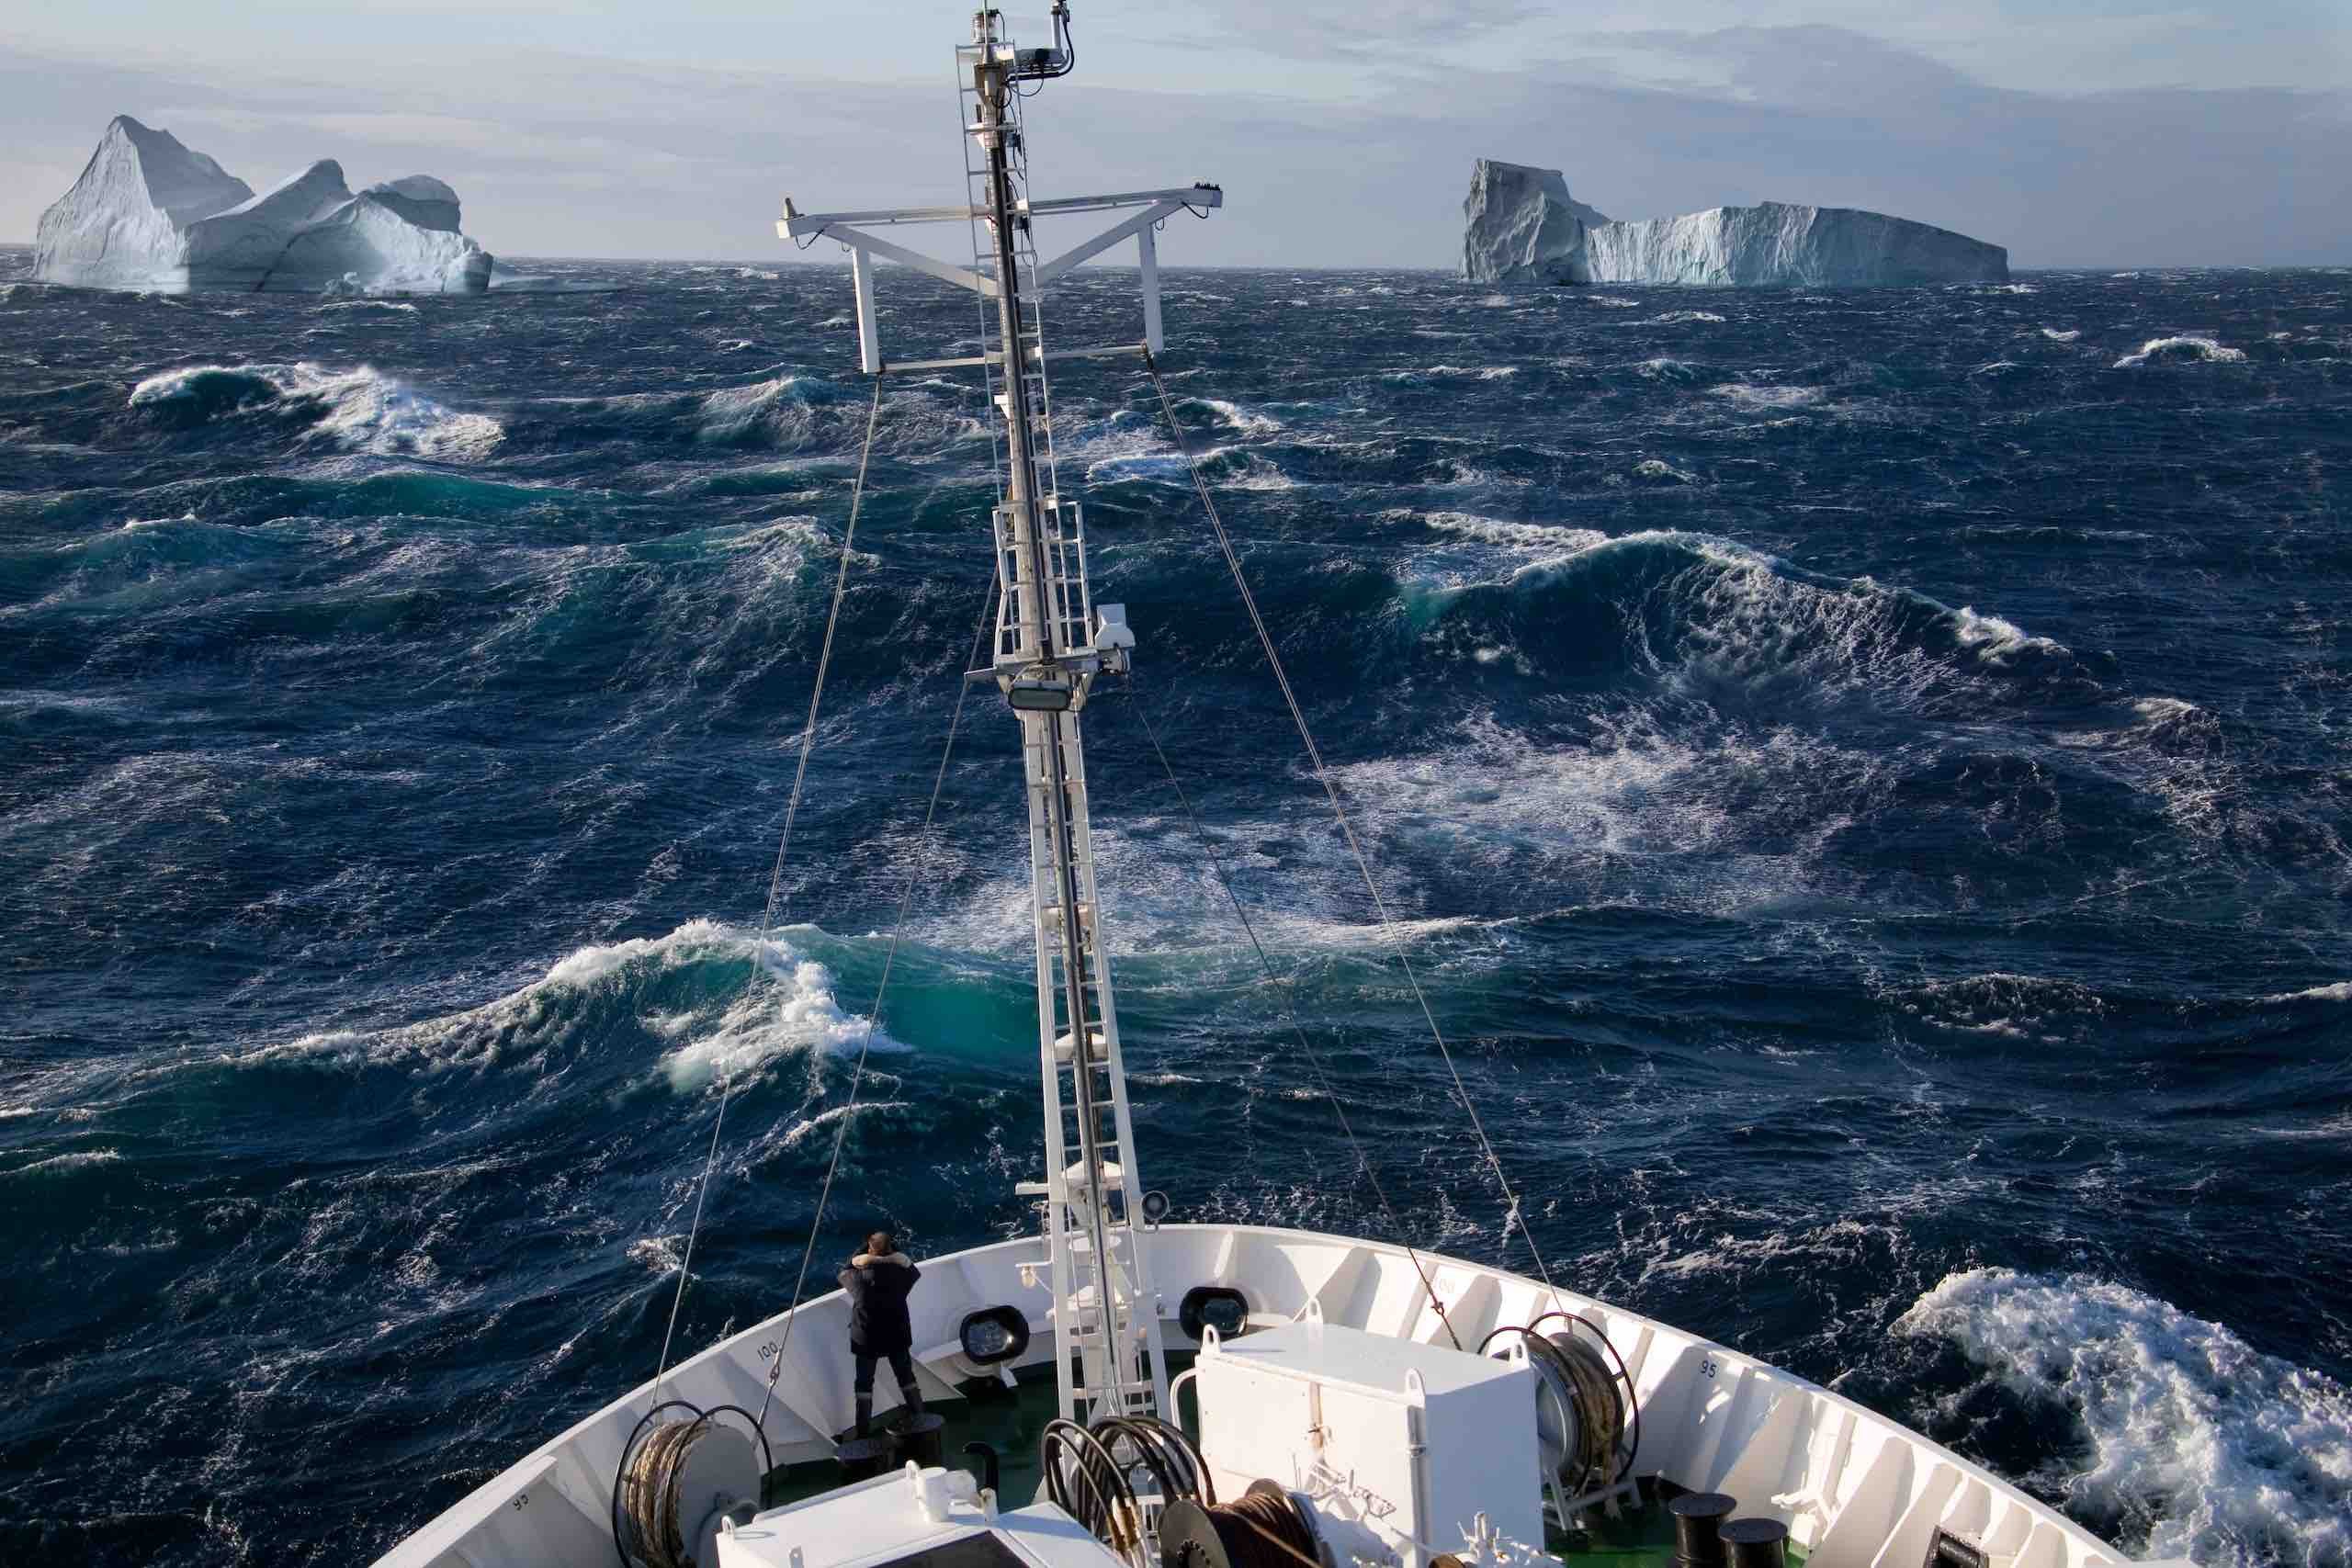 Illustrating the need for ruggedised IT equipment, the image shows the bow of a ship, facing stormy waters. Two icebergs are visible up ahead. The antenna mast is in the centre of the picture. The sea is dark blue, the ship is painted white. 